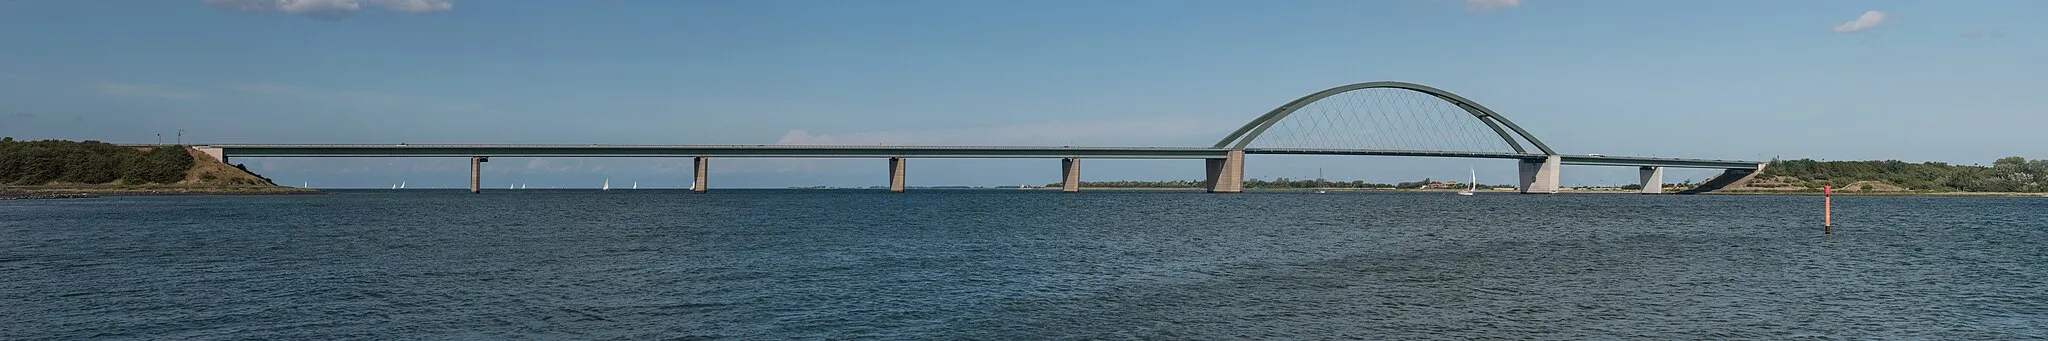 Photo showing: A panoramic image of the Fehmarn Sound Bridge as seen from Großenbroderfähre, located southeast of the German mainland